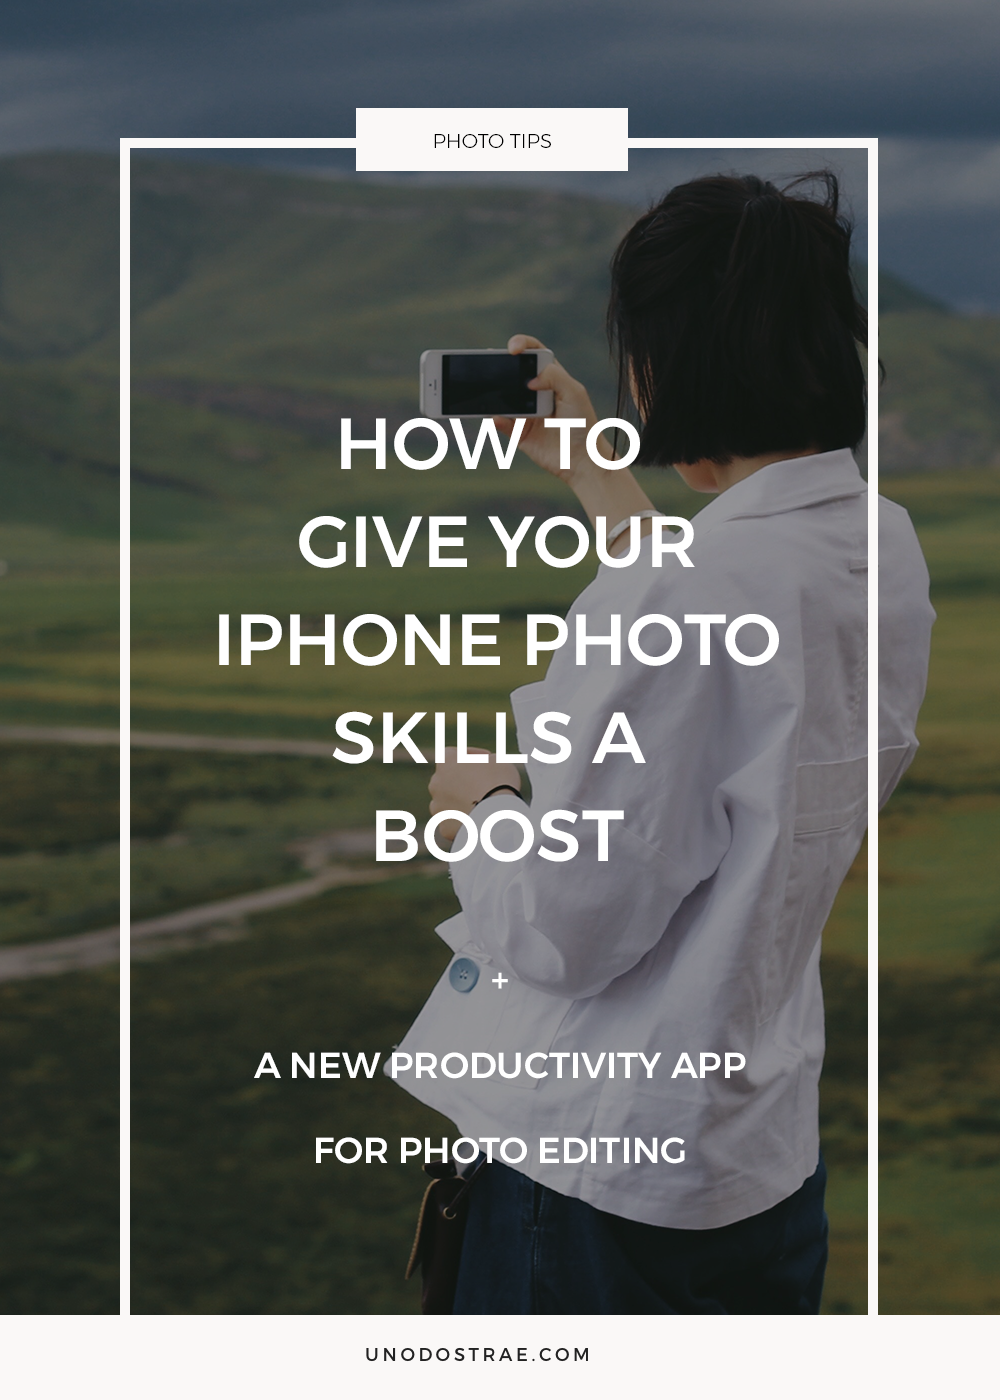 4 Easy Tips For Better Smartphone Pictures - unodostrae.com